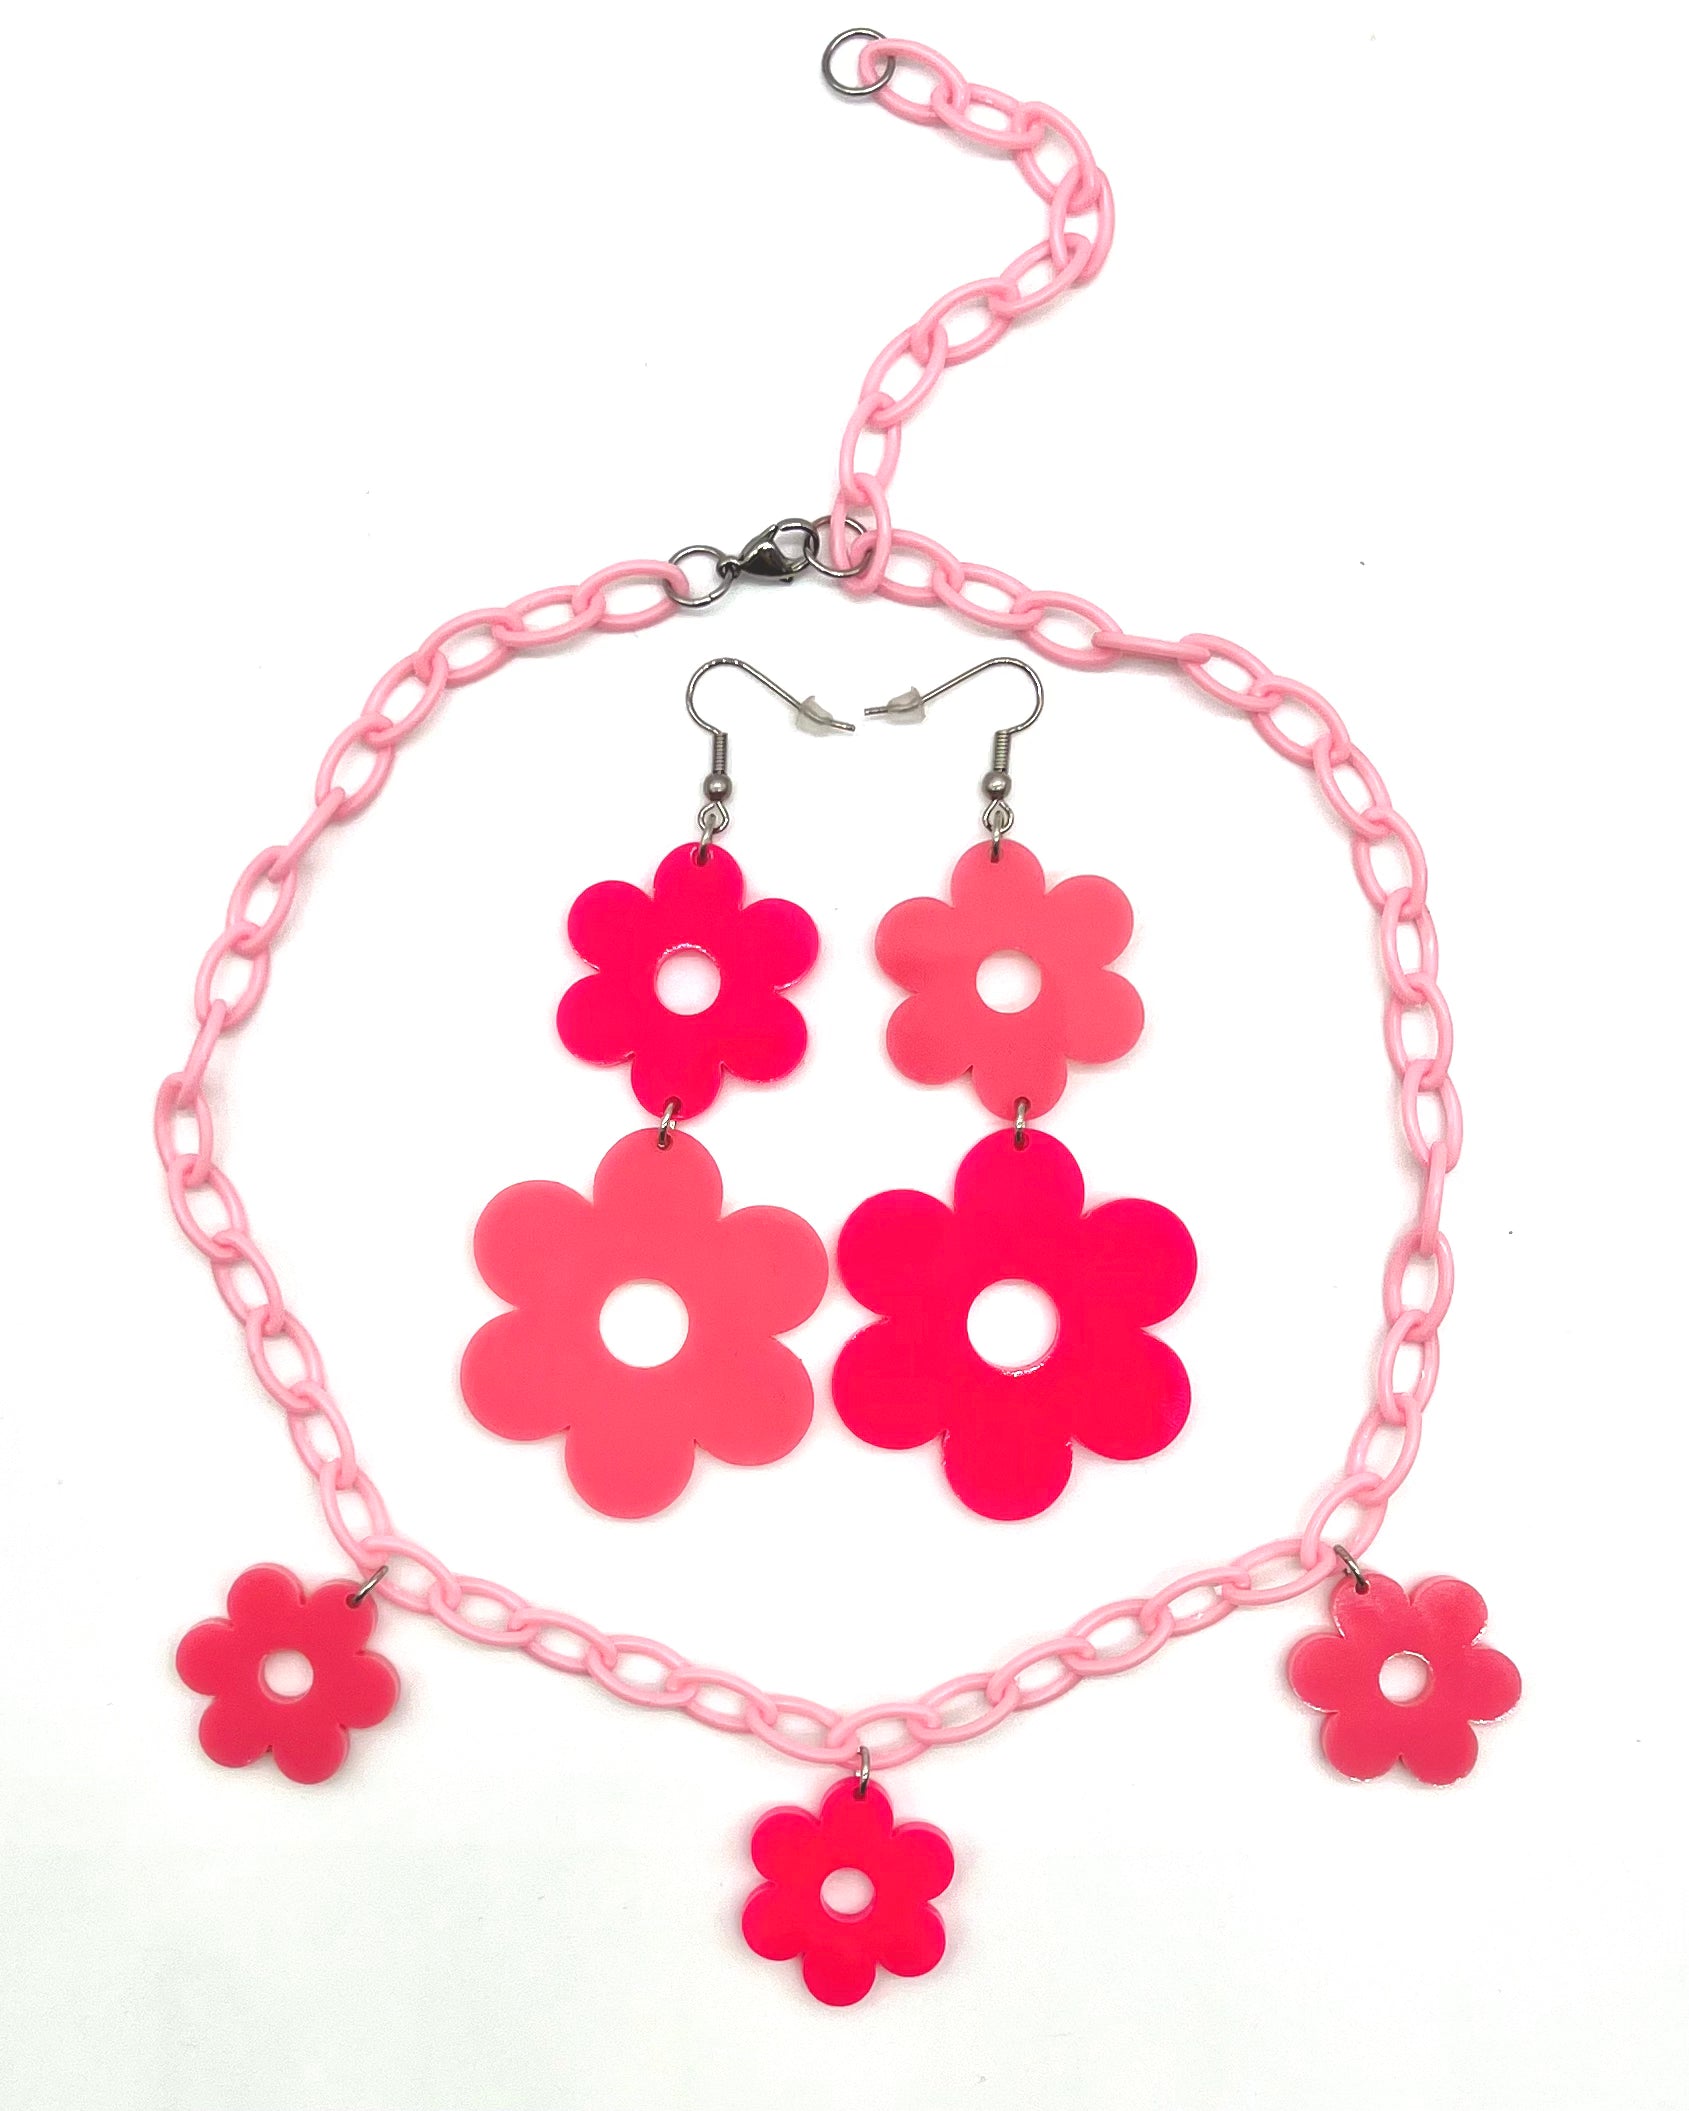 A pair of Flower Power Pink Earrings with the matching Flower Power Pink Necklace.